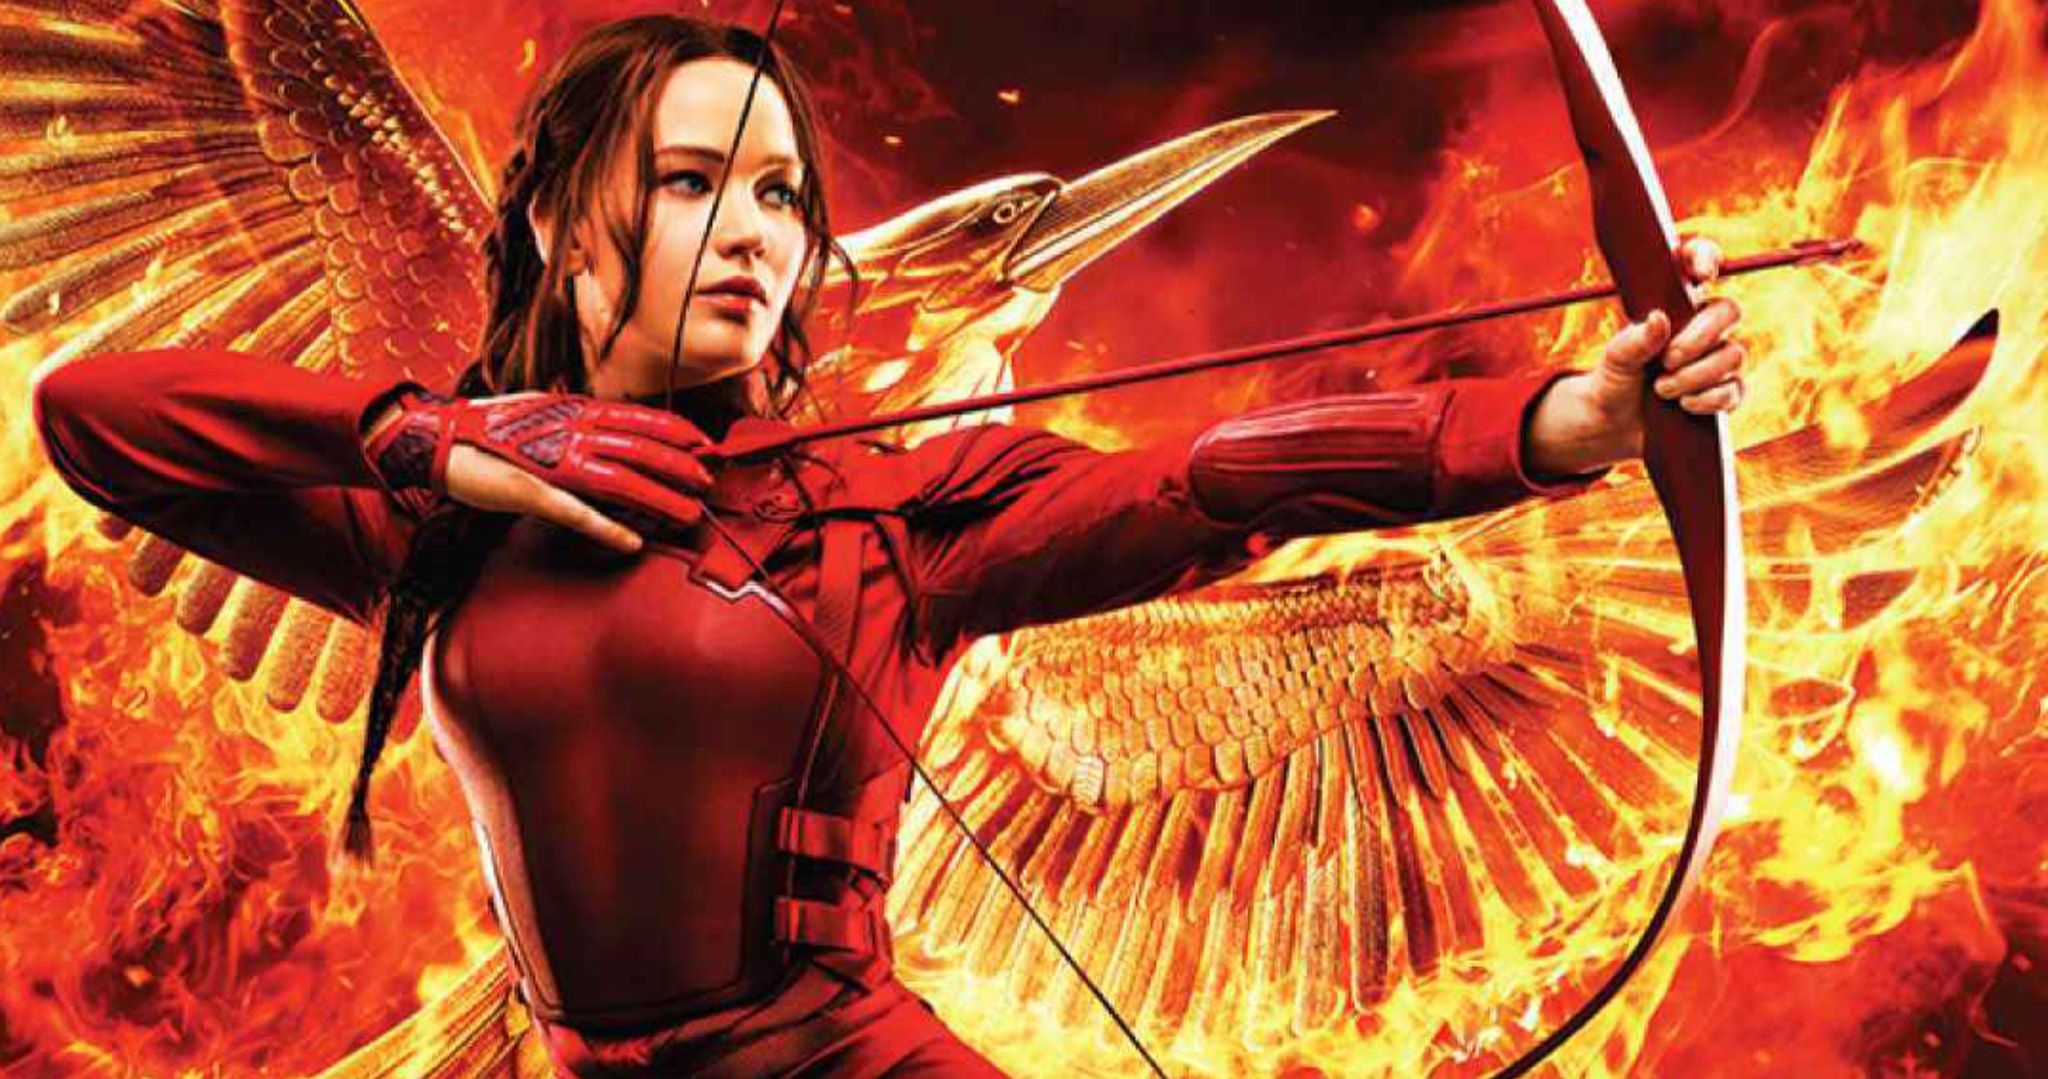 The Hunger Games Prequel Movie Is Officially Happening with Original Creative Team